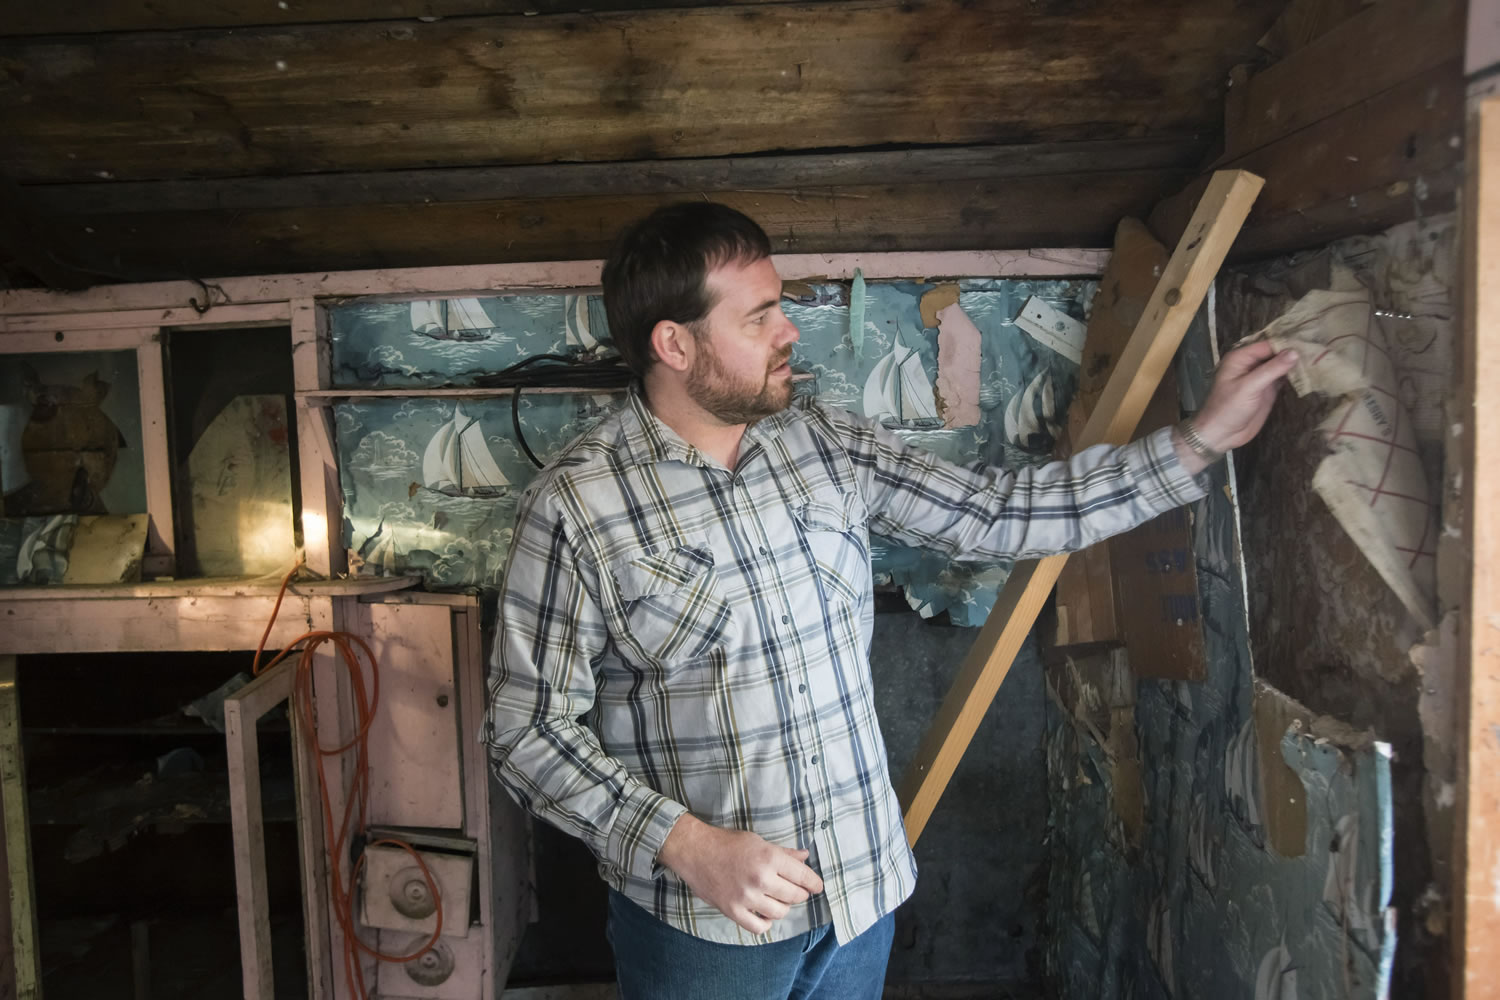 Design consultant Byron Folwell discusses the condition of and restoration work needed for the work shed at the James Castle residence in Boise, Idaho. The modest century-old home sits idle and vacant in a quiet, residential neighborhood.